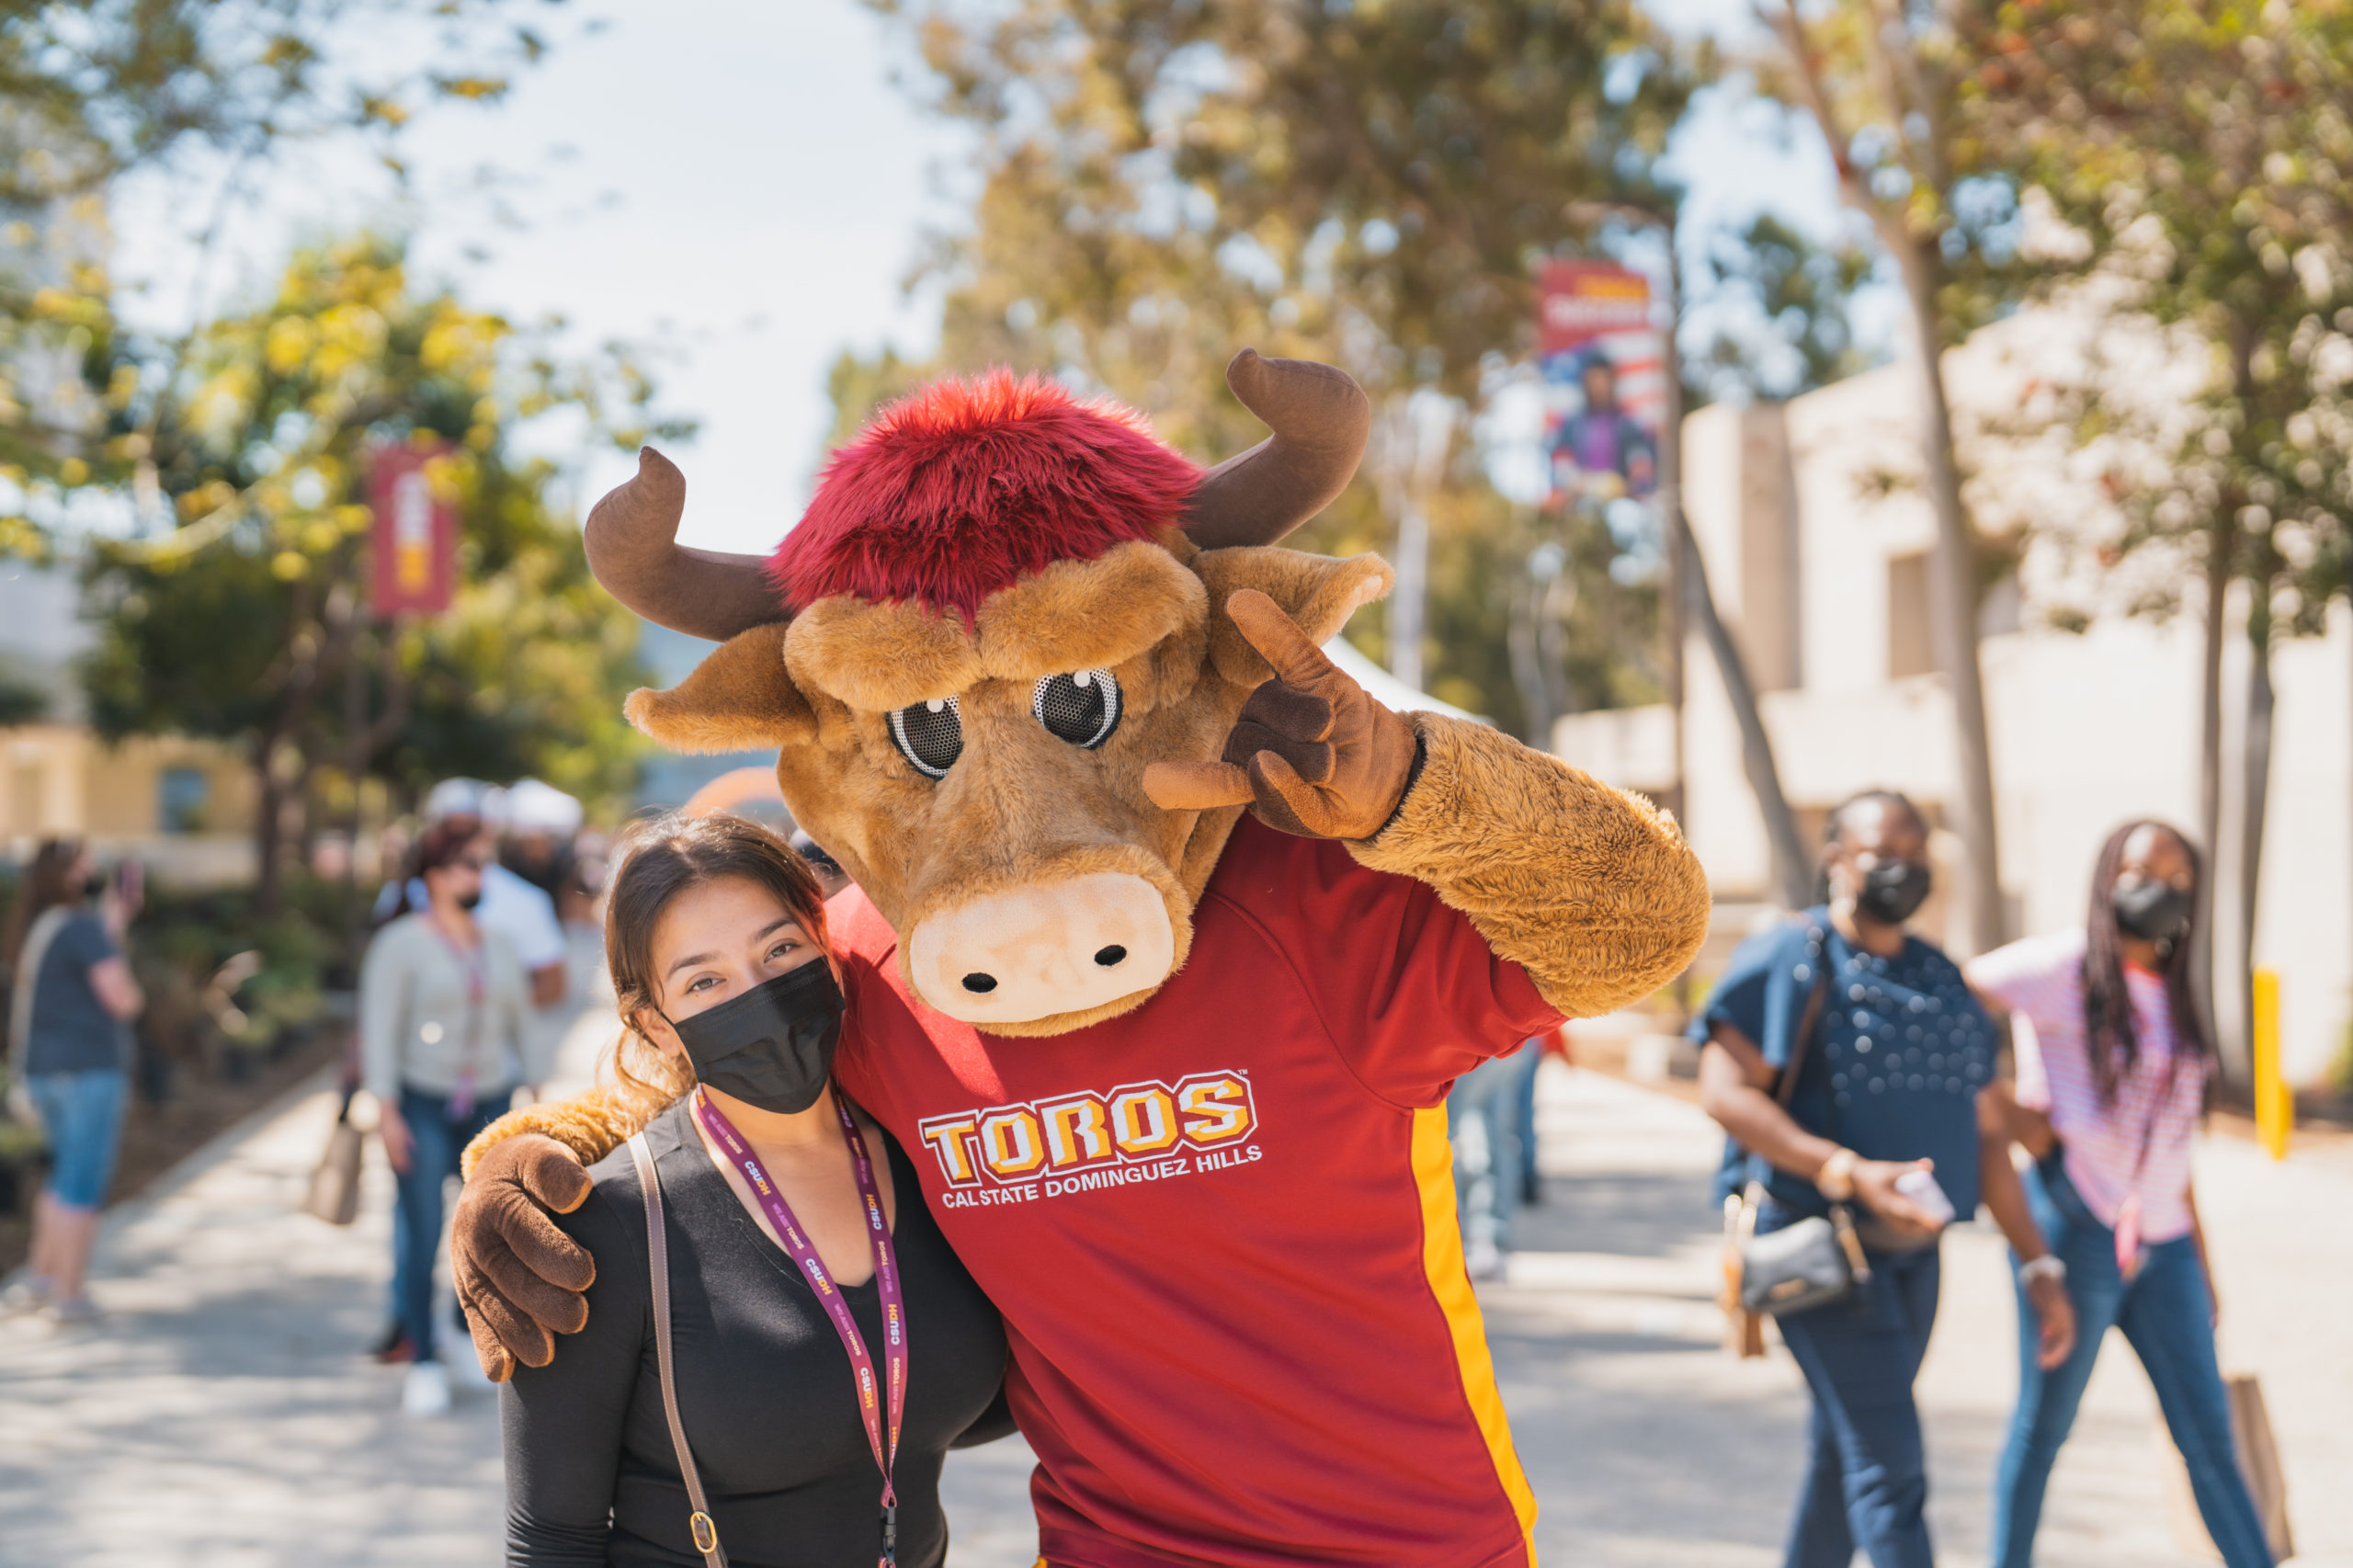 Teddy the Toro poses with a prospective CSUDH student.